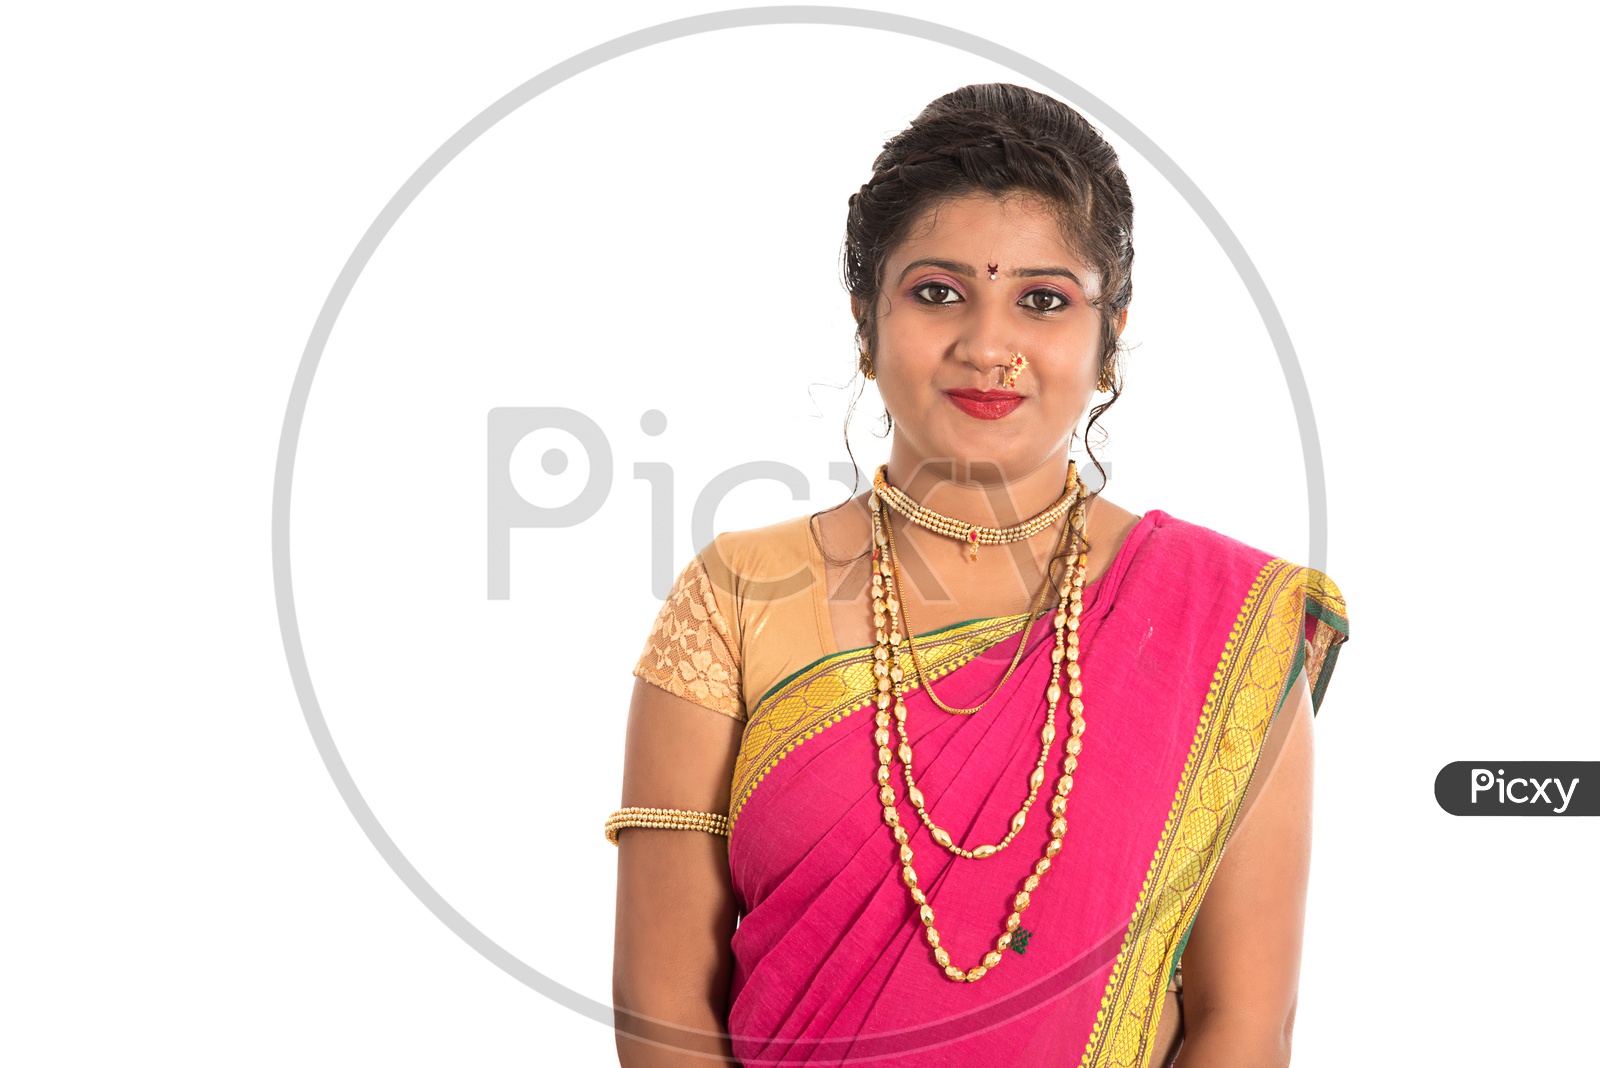 Portrait Of a Young Traditional Marathi Woman Wearing an Elegant Sari And Posing On an Isolated White Background